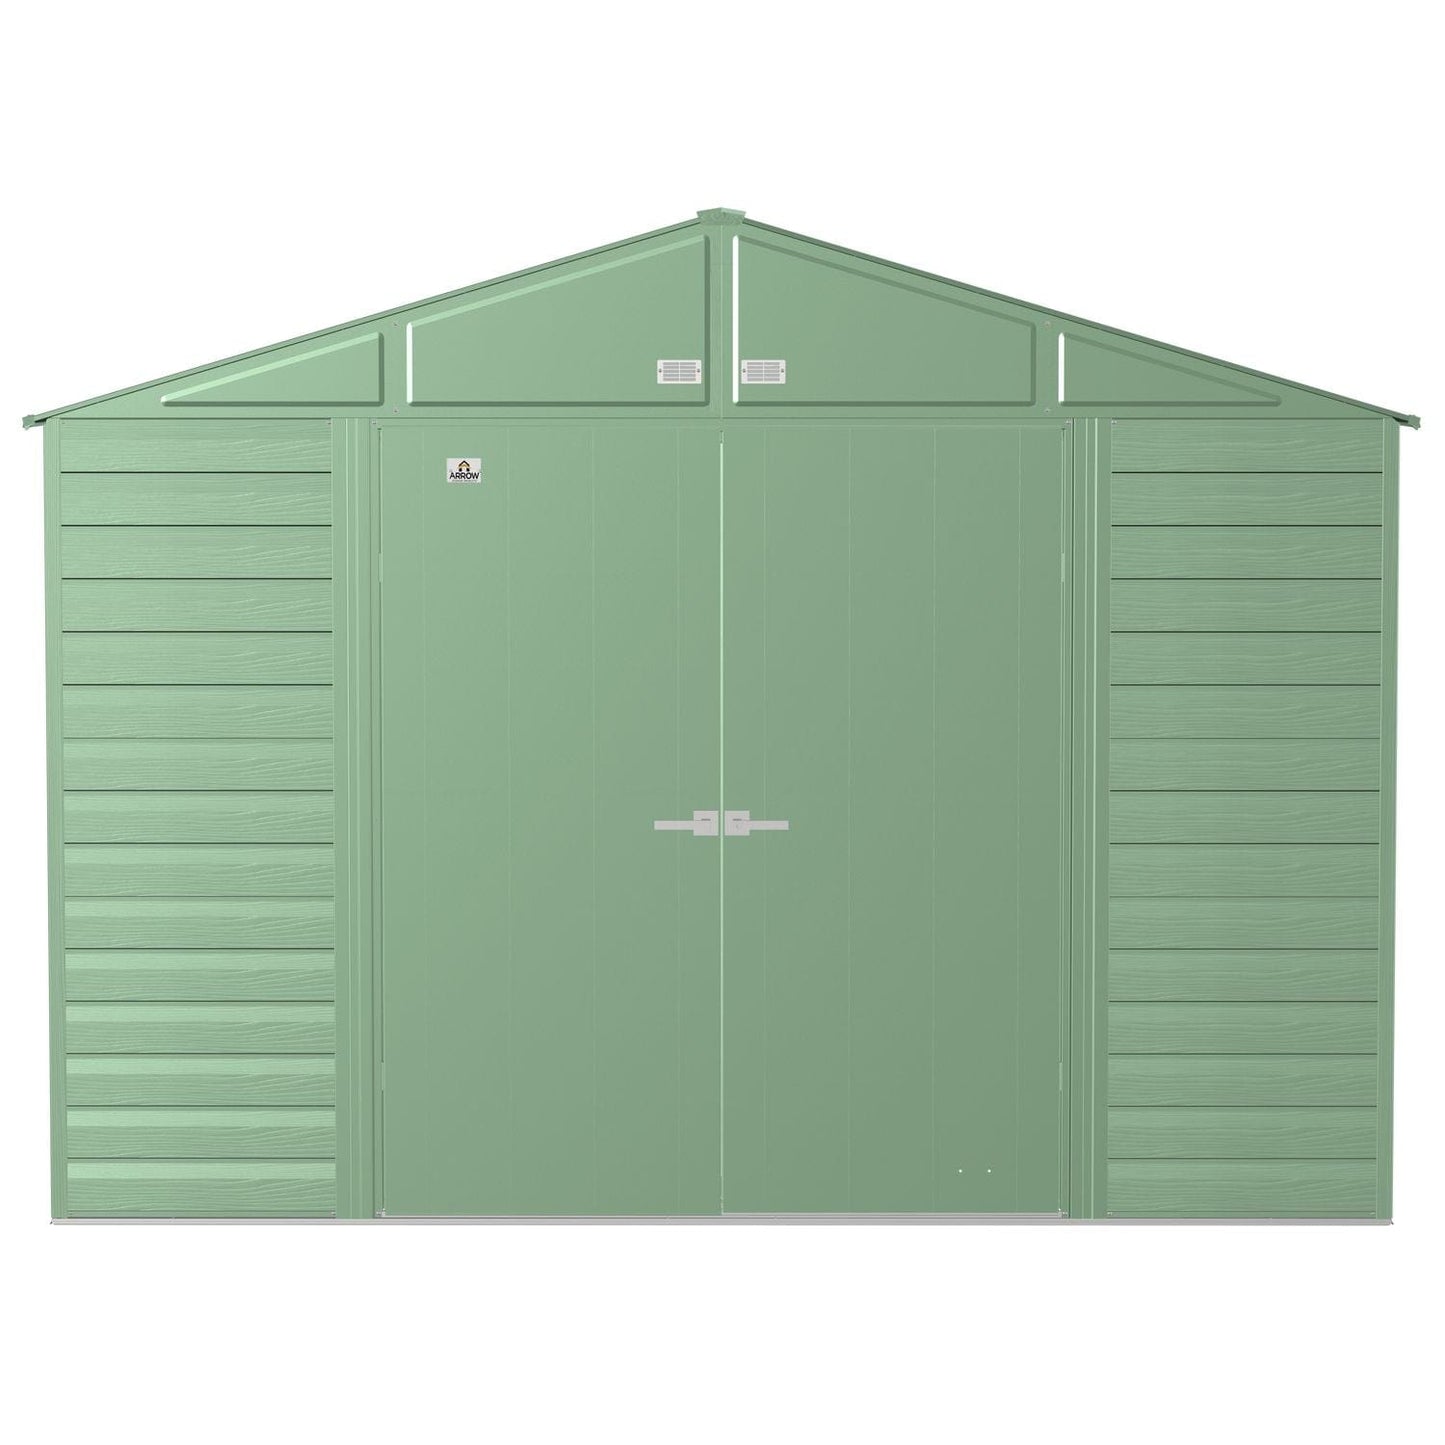 Arrow Sheds & Storage Buildings Arrow | Select Gable Roof Steel Storage Shed, 10x14 ft., Sage Green SCG1014SG